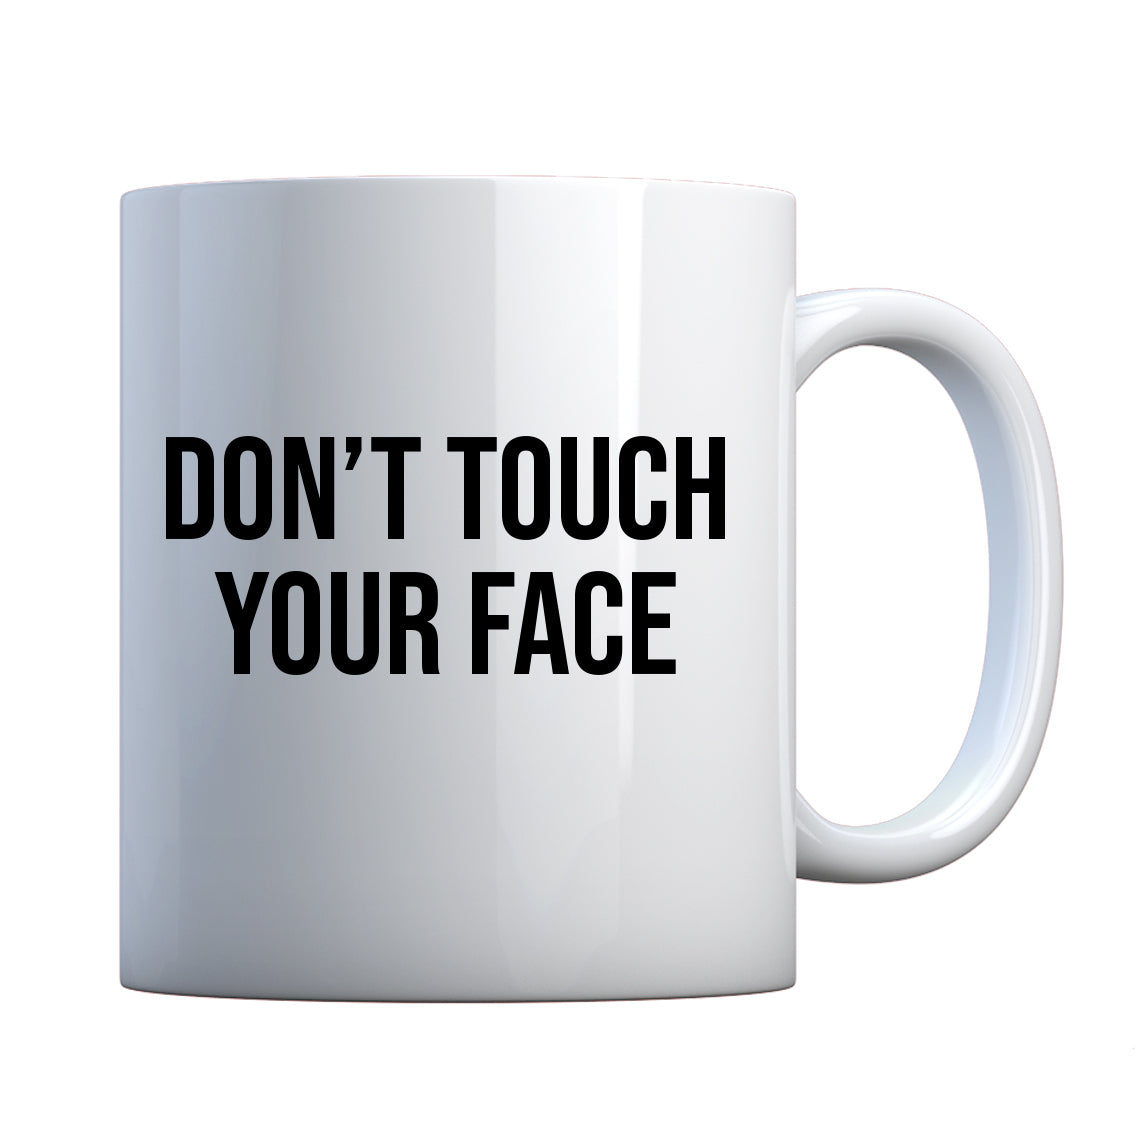 DON'T TOUCH YOUR FACE Ceramic Gift Mug